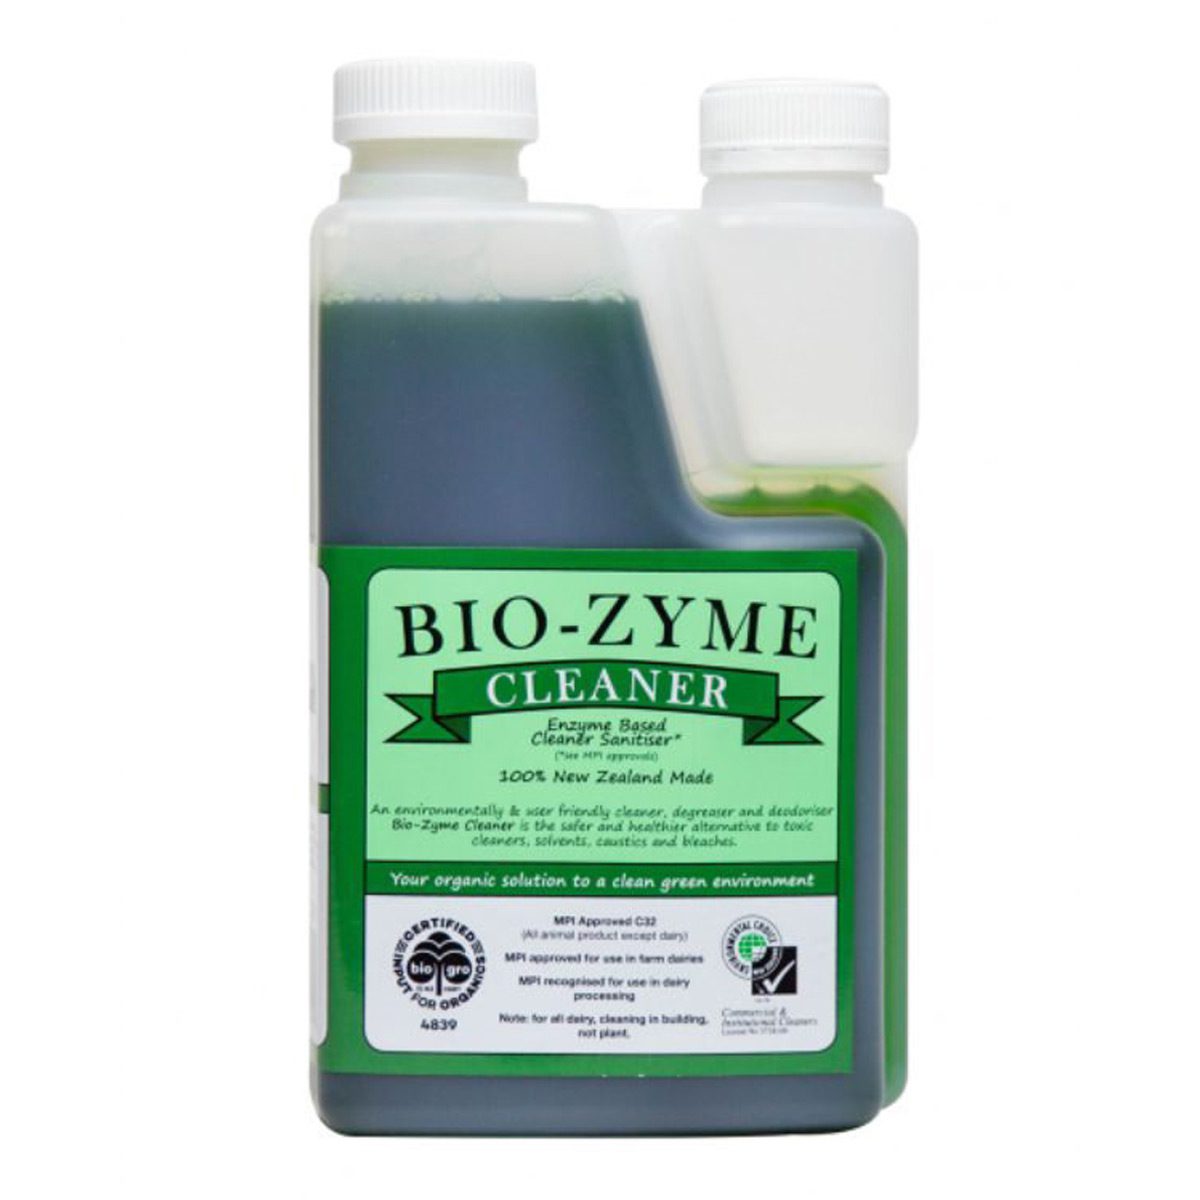 cleaning-products-environmental-bio-zyme-cleaner-green1L-litre-safer-than-toxic-solvents-cleaners-bleaches-caustics-all-purpose-cleaner-sanitiser-deodoriser-1L-makes-33L-litres-vjs-distributors-BZCLE1L